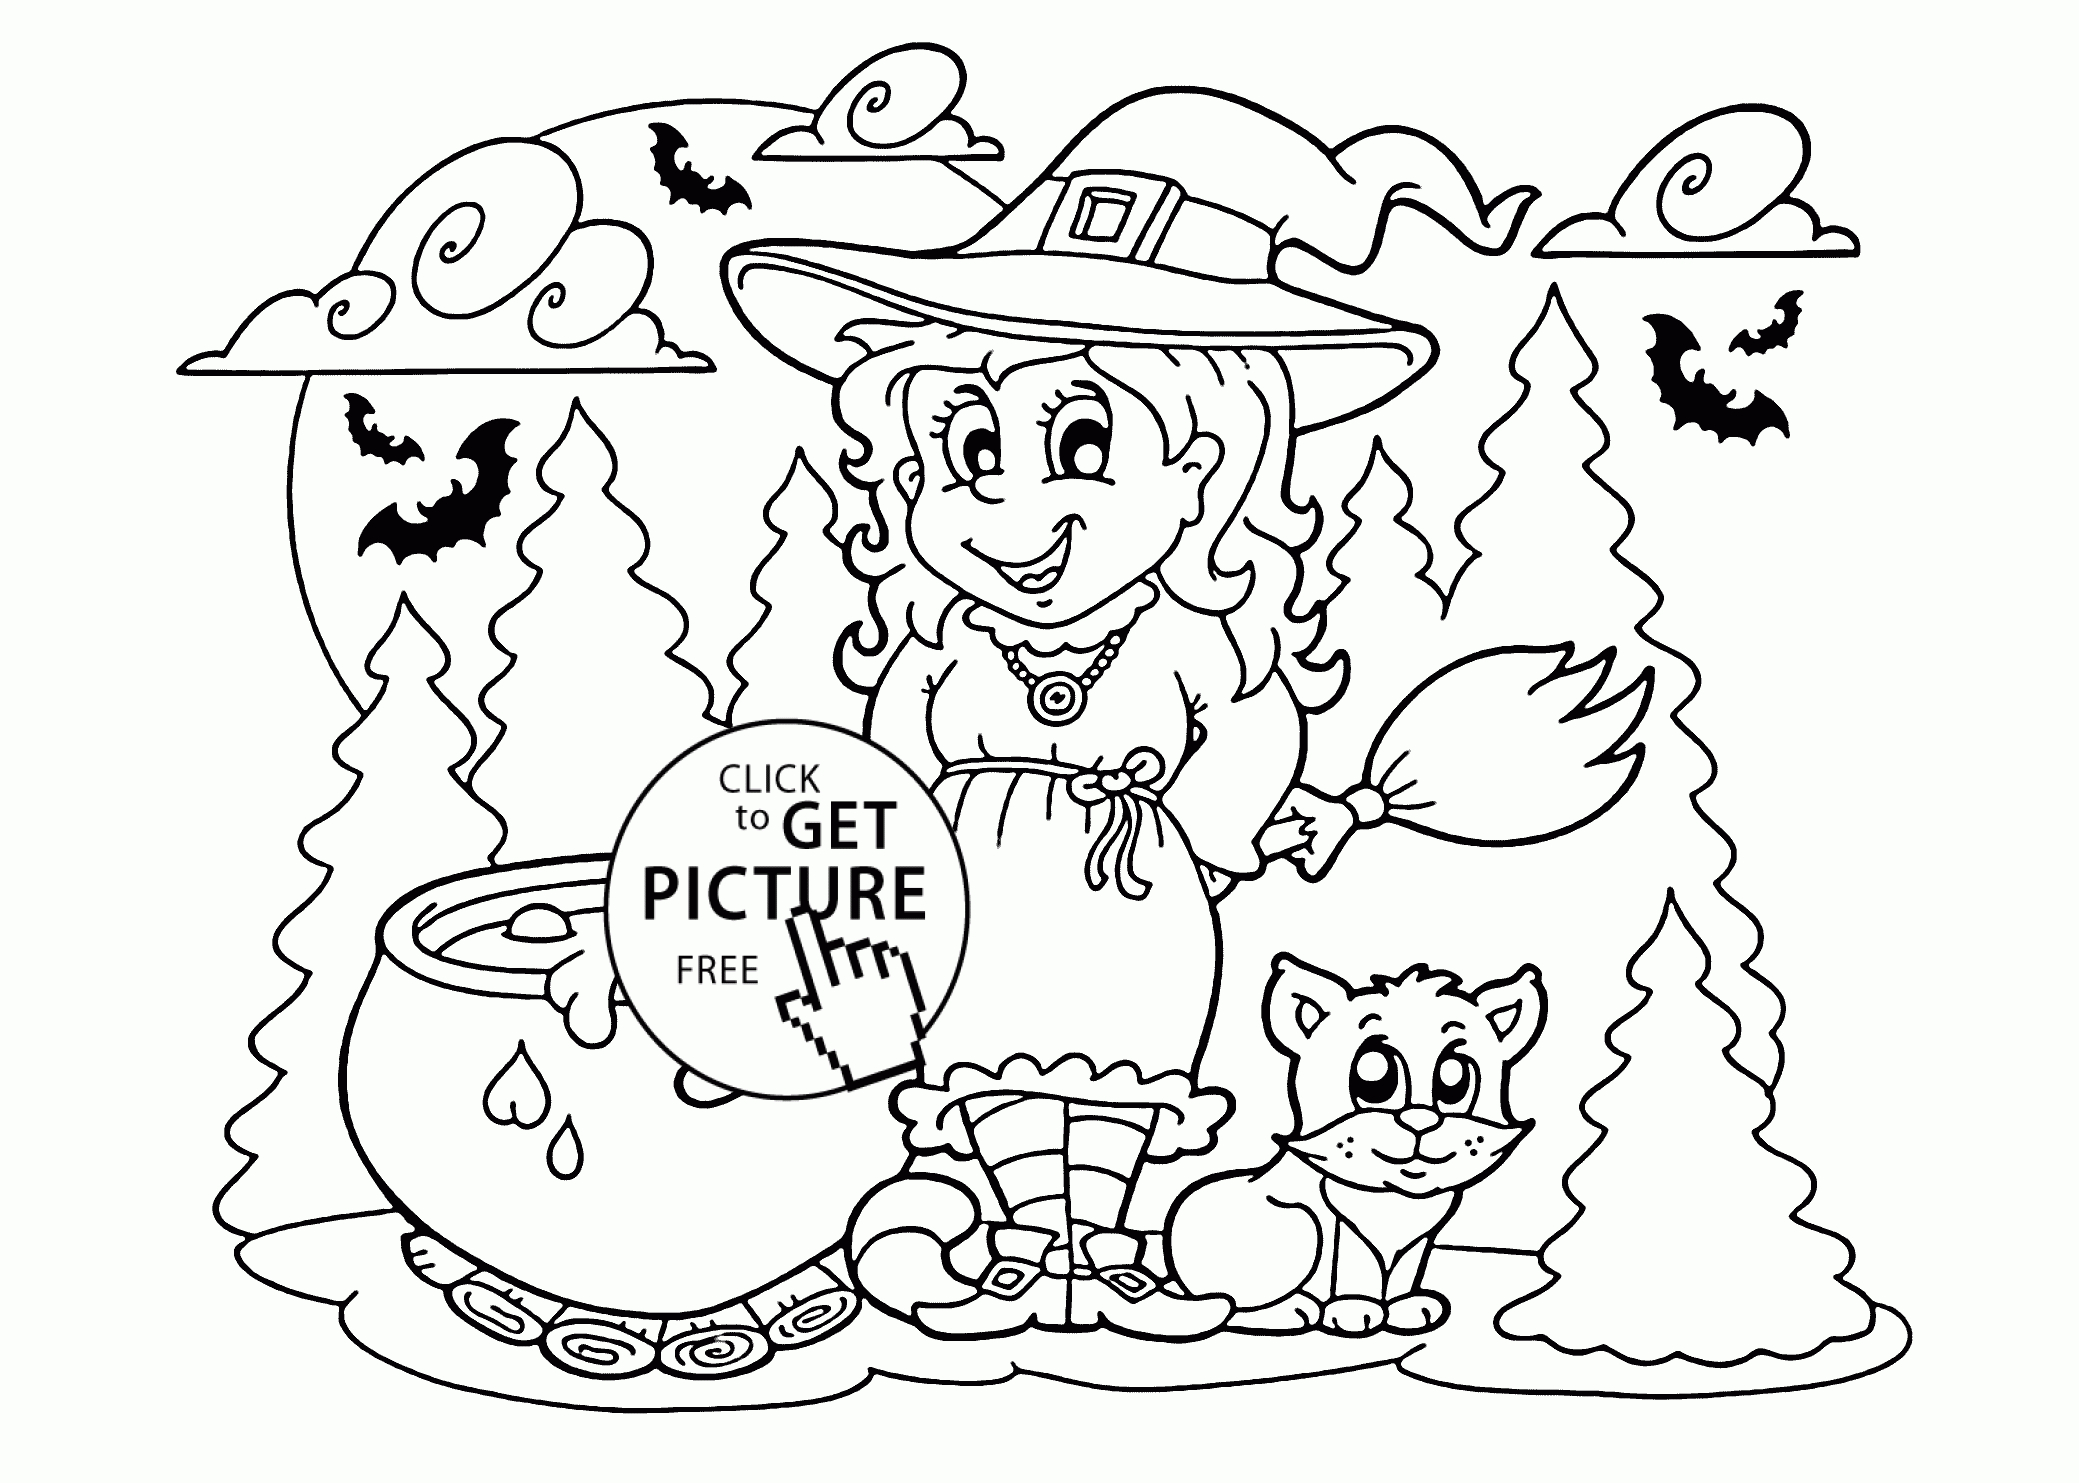 Halloween Witch And Cat Coloring Page For Kids, Printable Free - Free Printable Pictures Of Witches